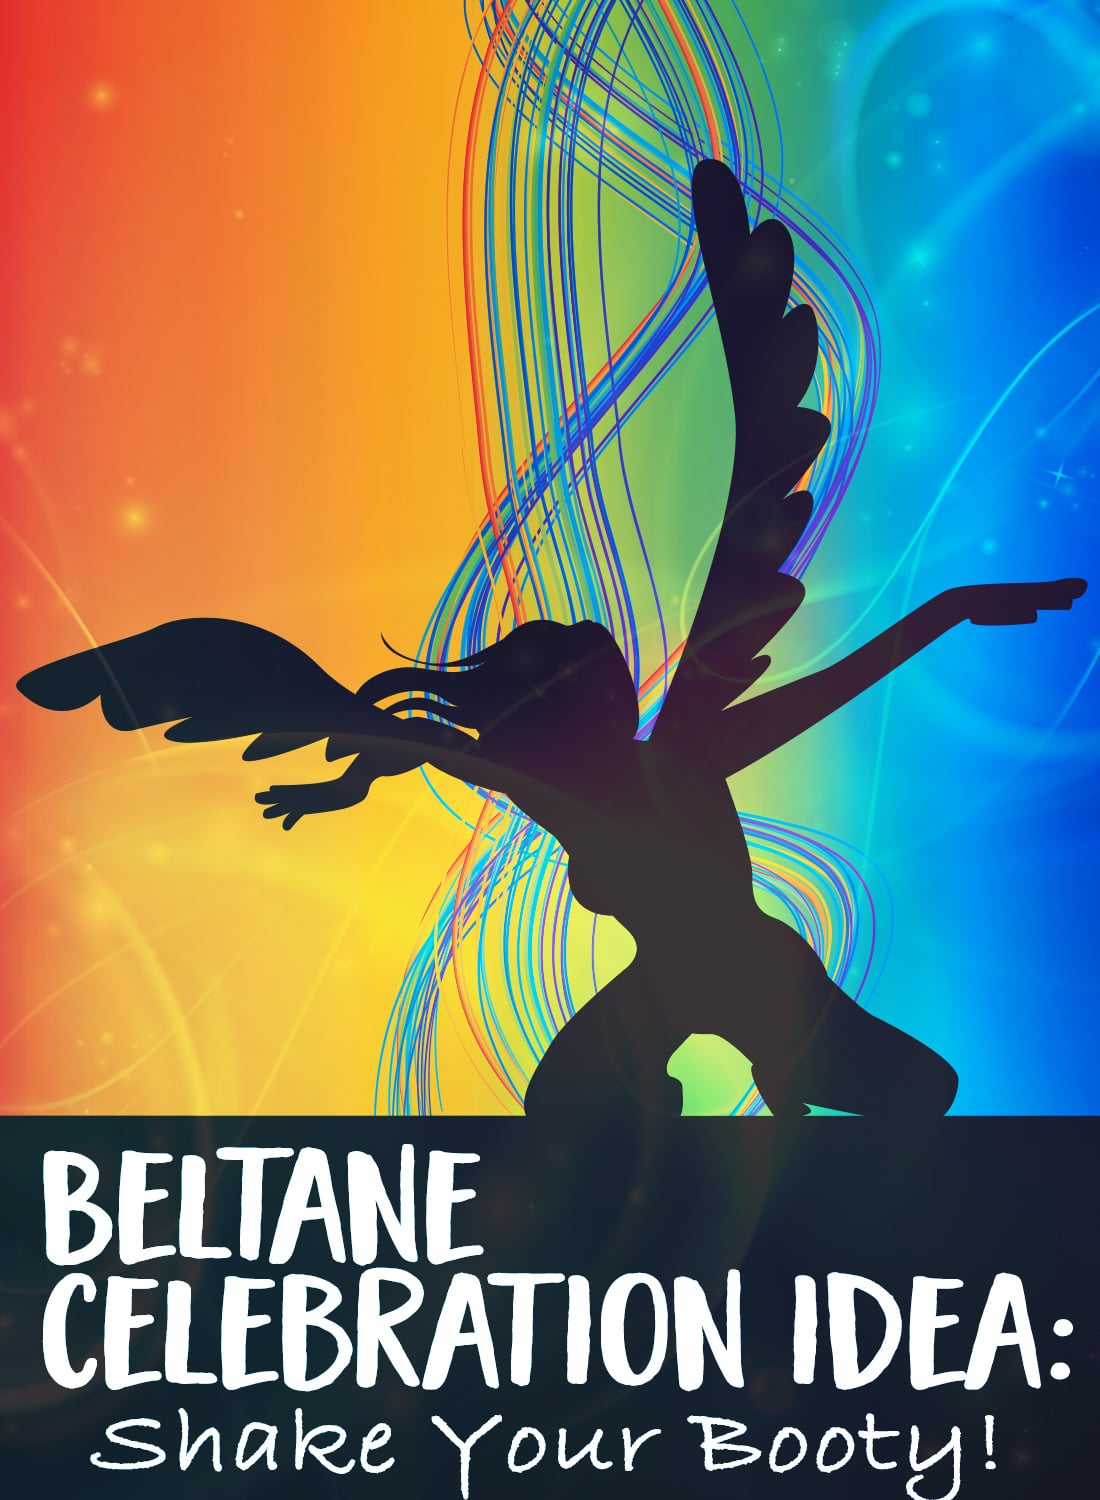 Beltane Celebration Idea - Dance and Shake Your Booty